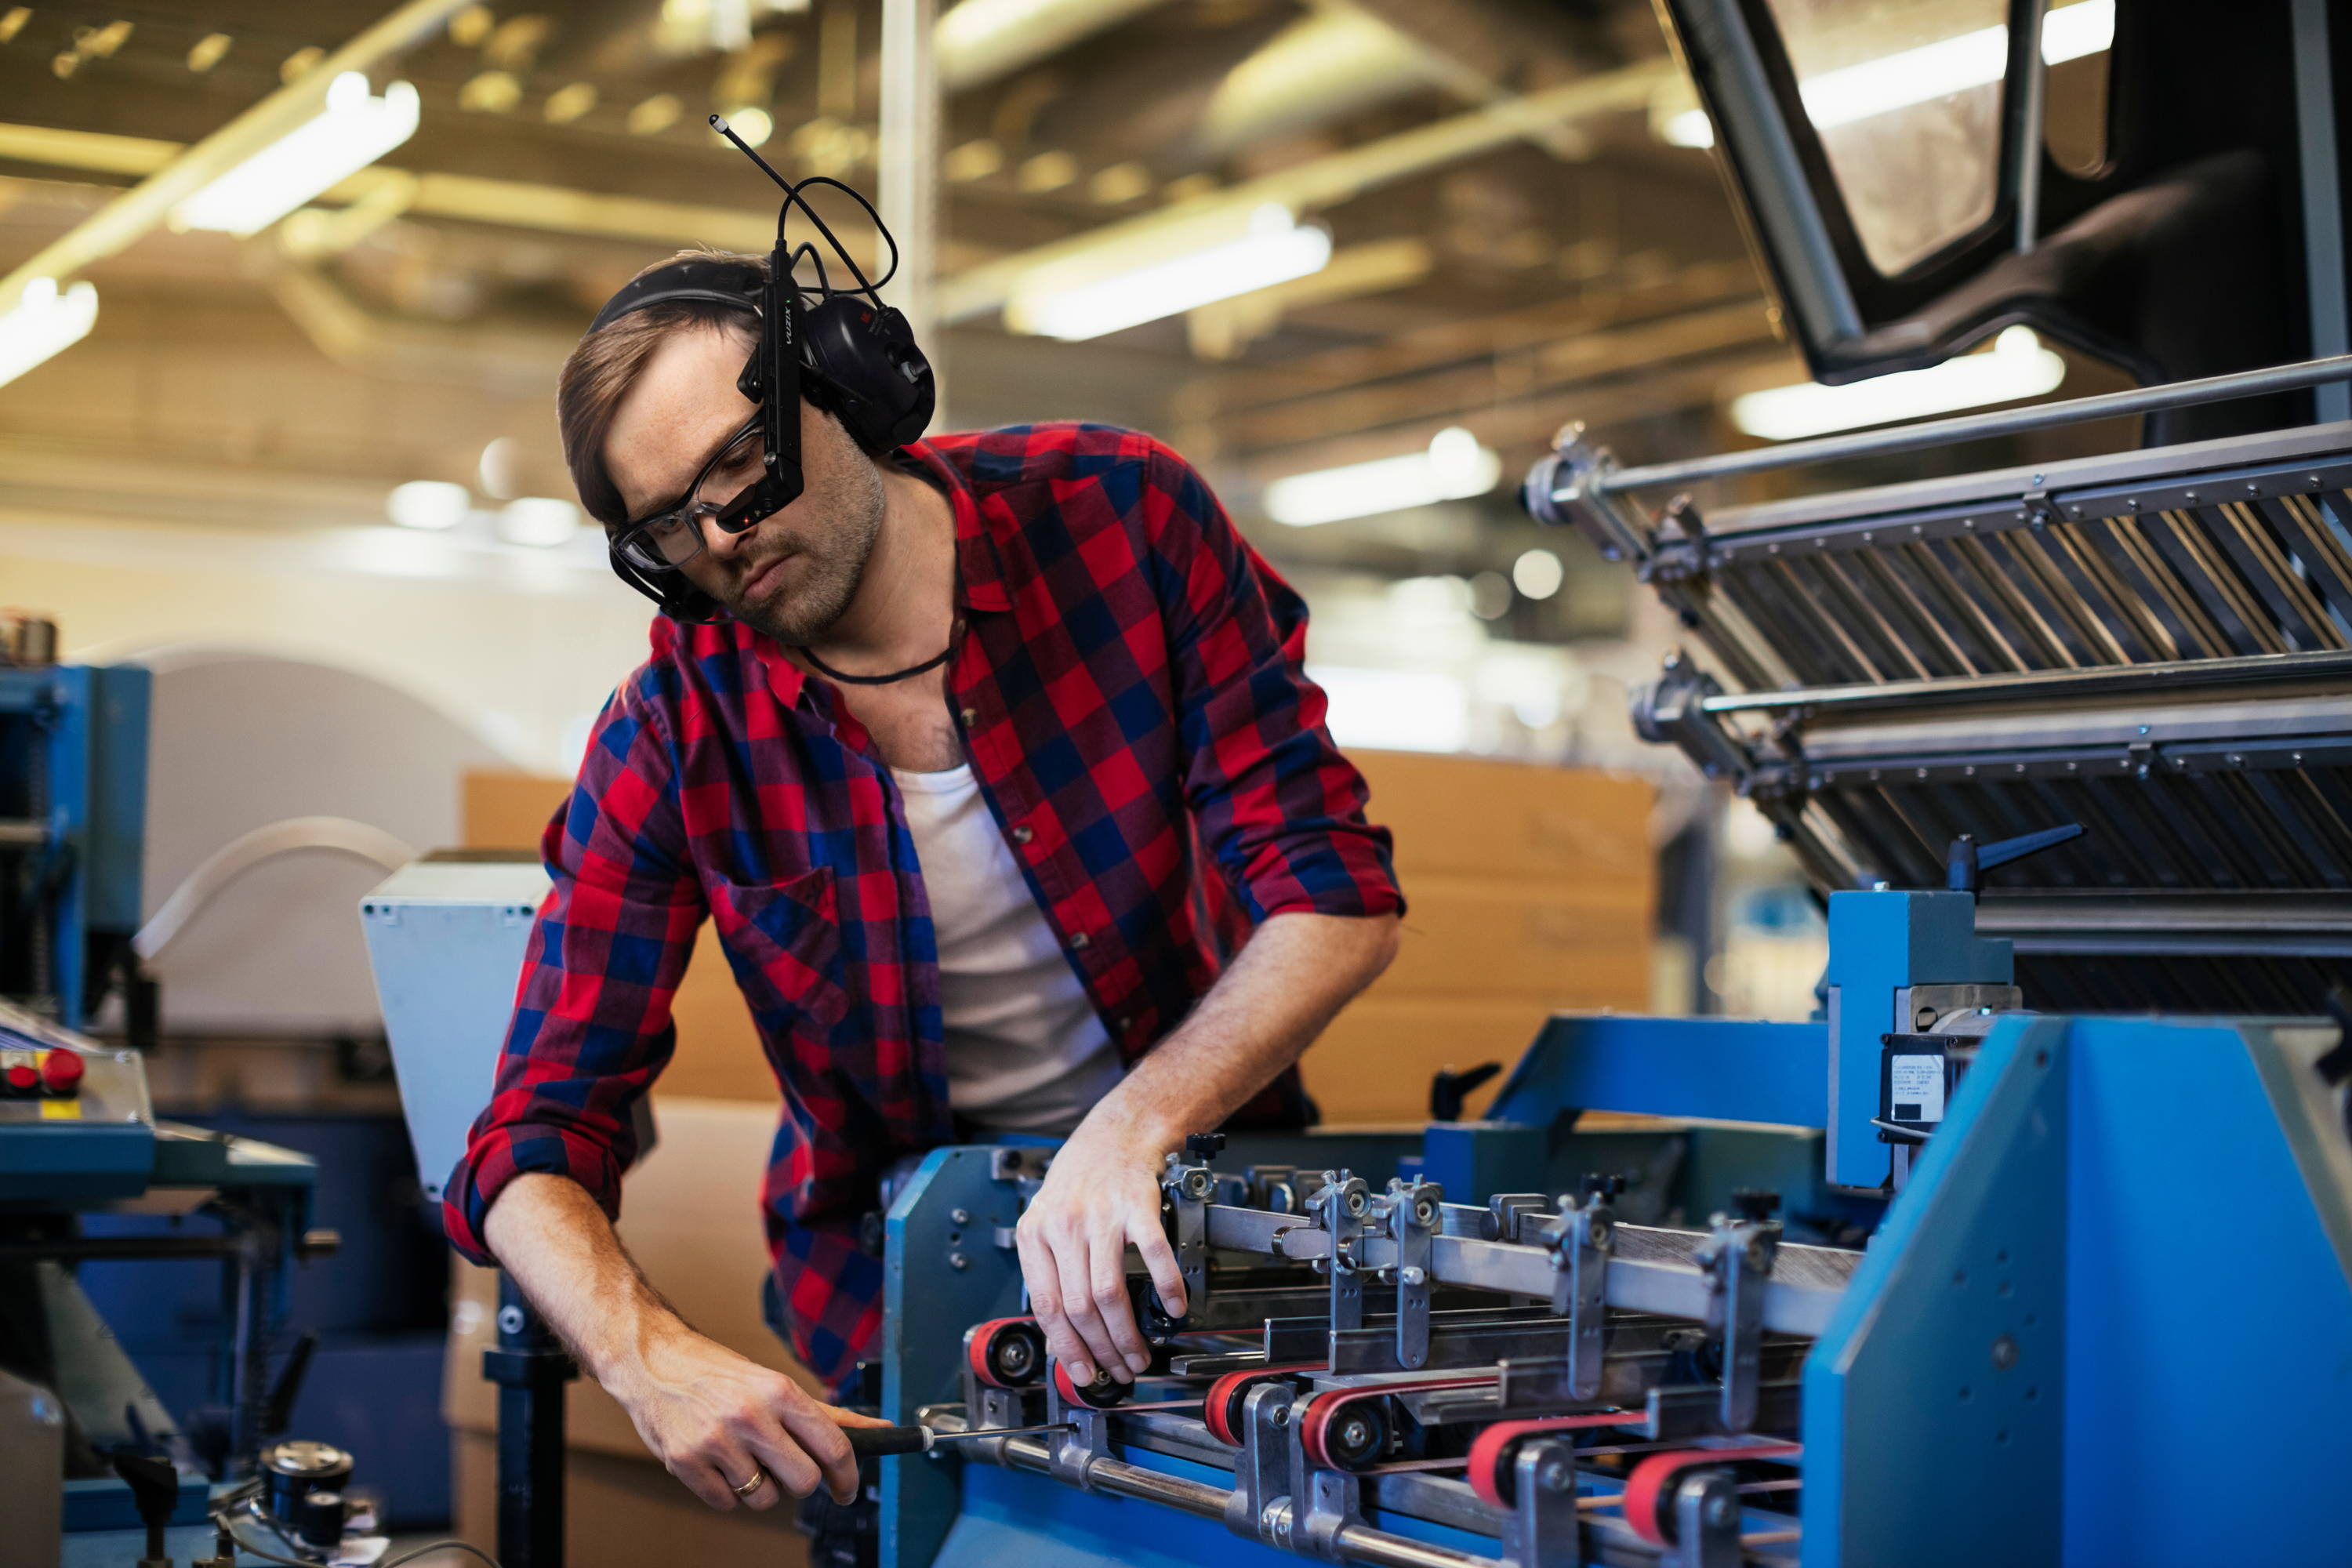 Man in red-and-blue checked shirt, wearing Vuzix smart glasses, repairs machinery on the factory floor.